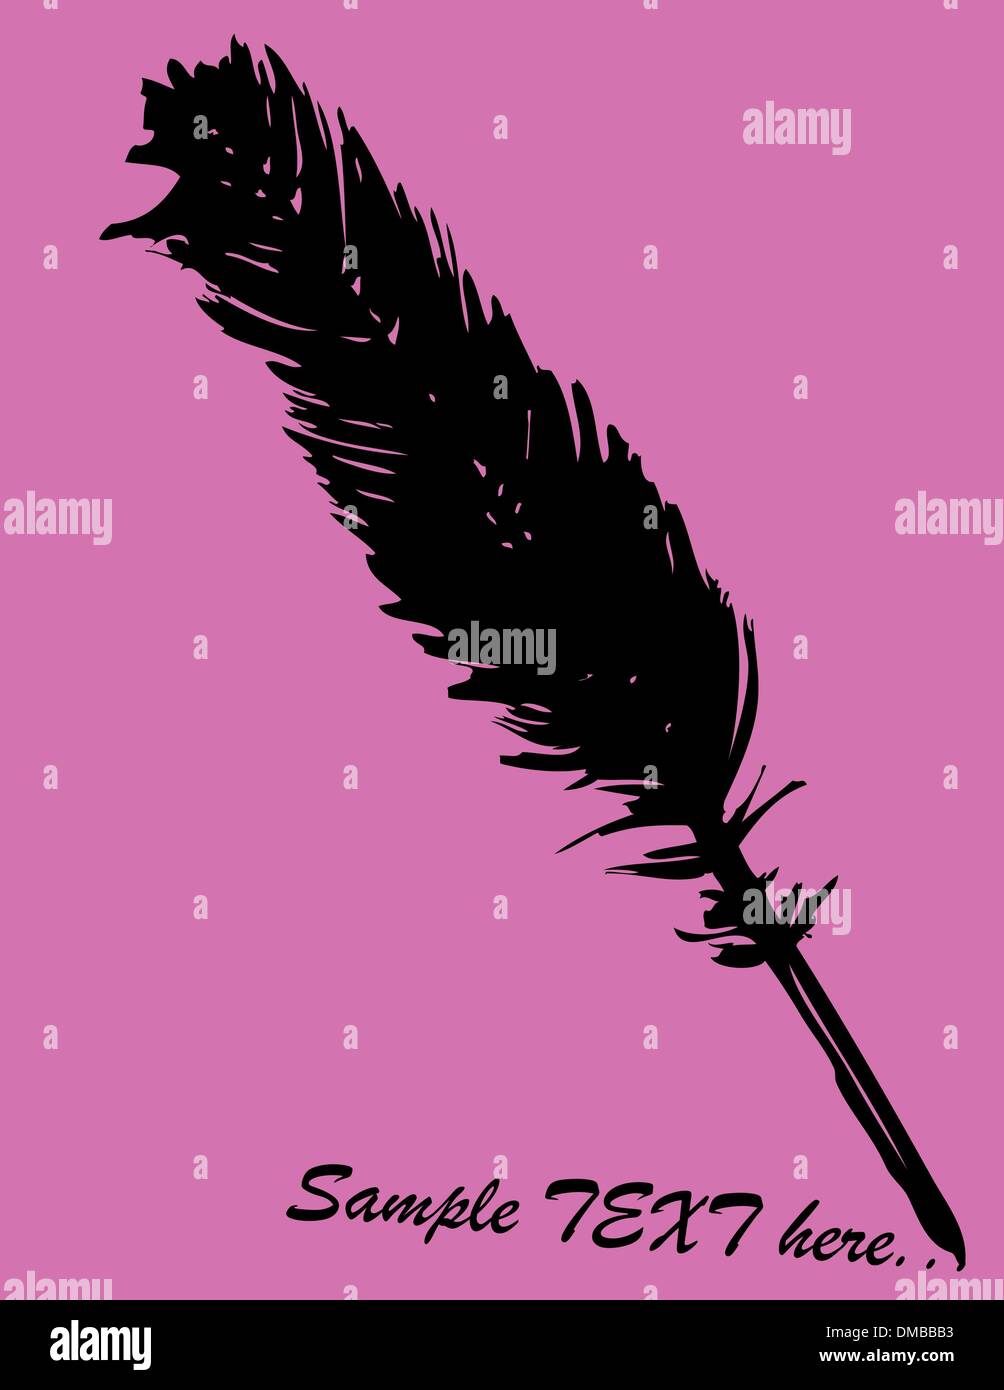 black feather Stock Vector